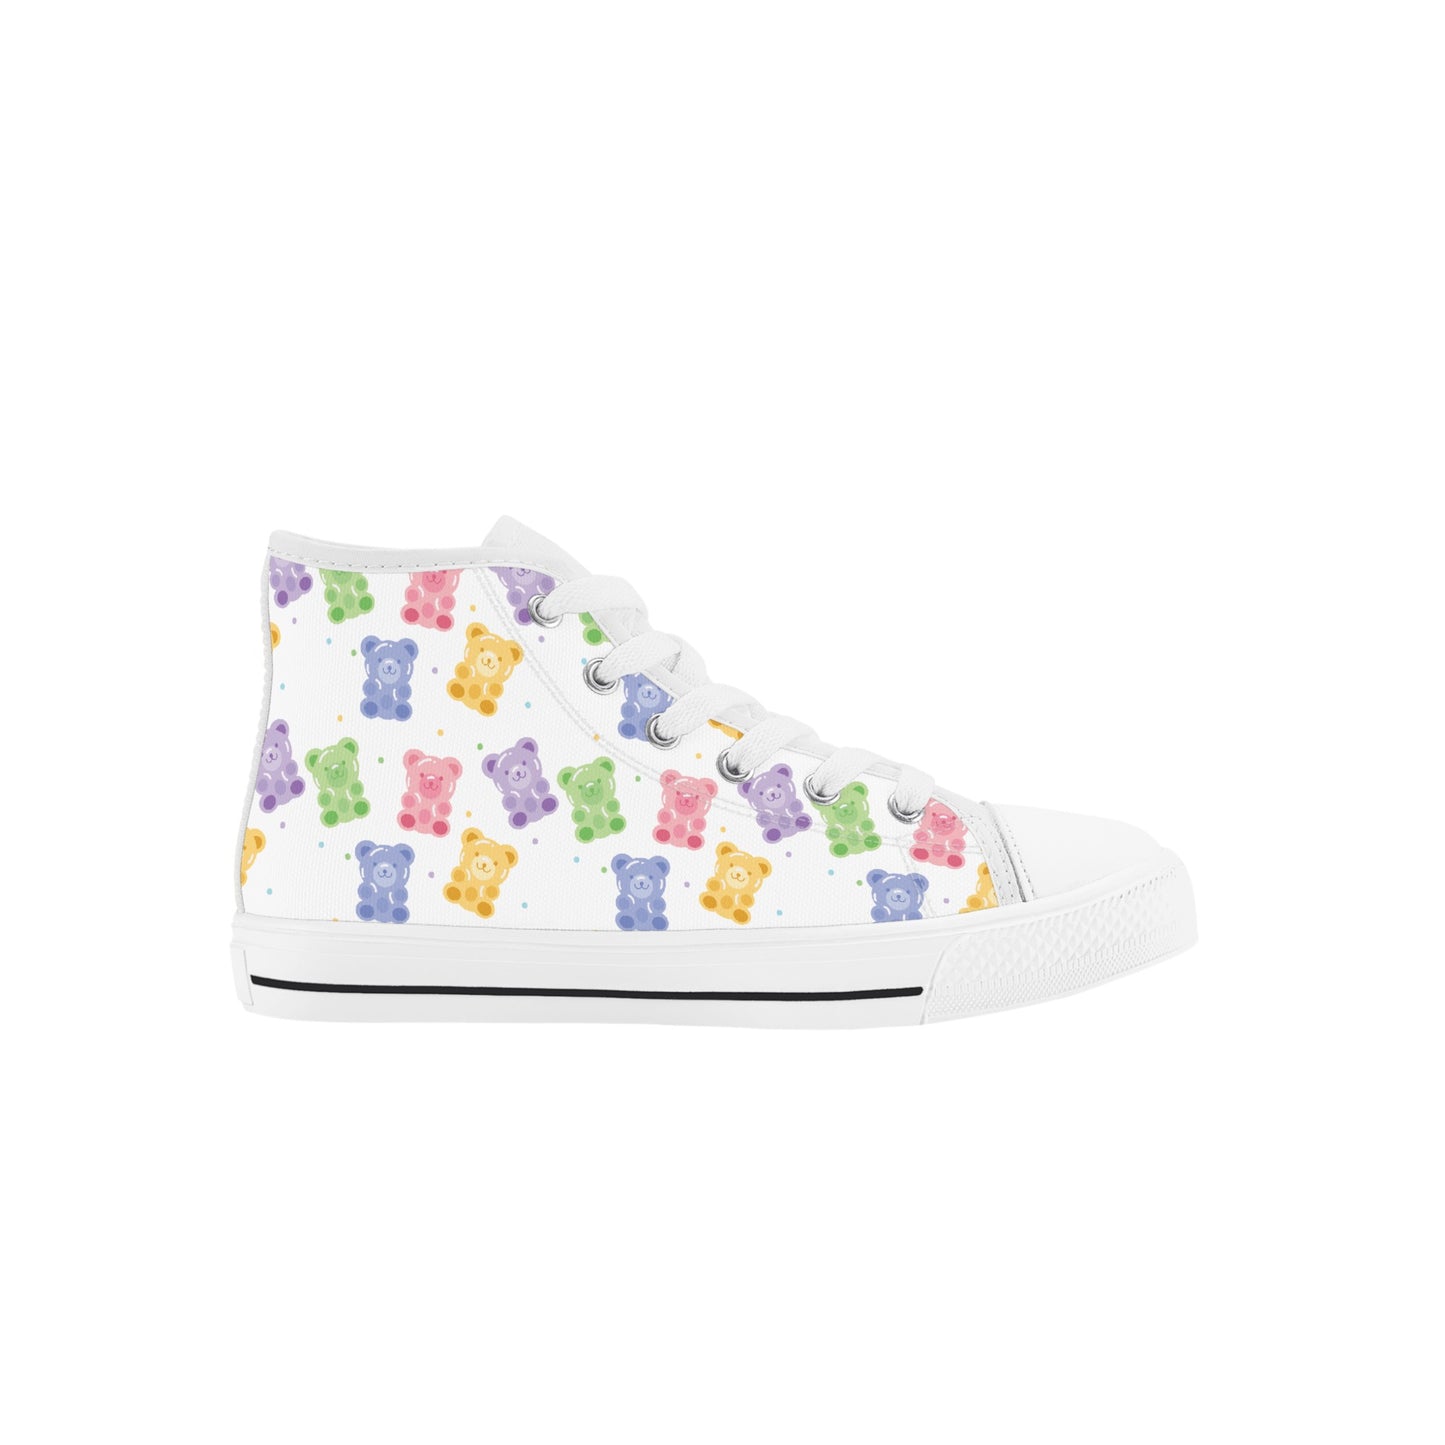 Personalize-Gummy Bears Pattern Kids High Top Canvas Shoes